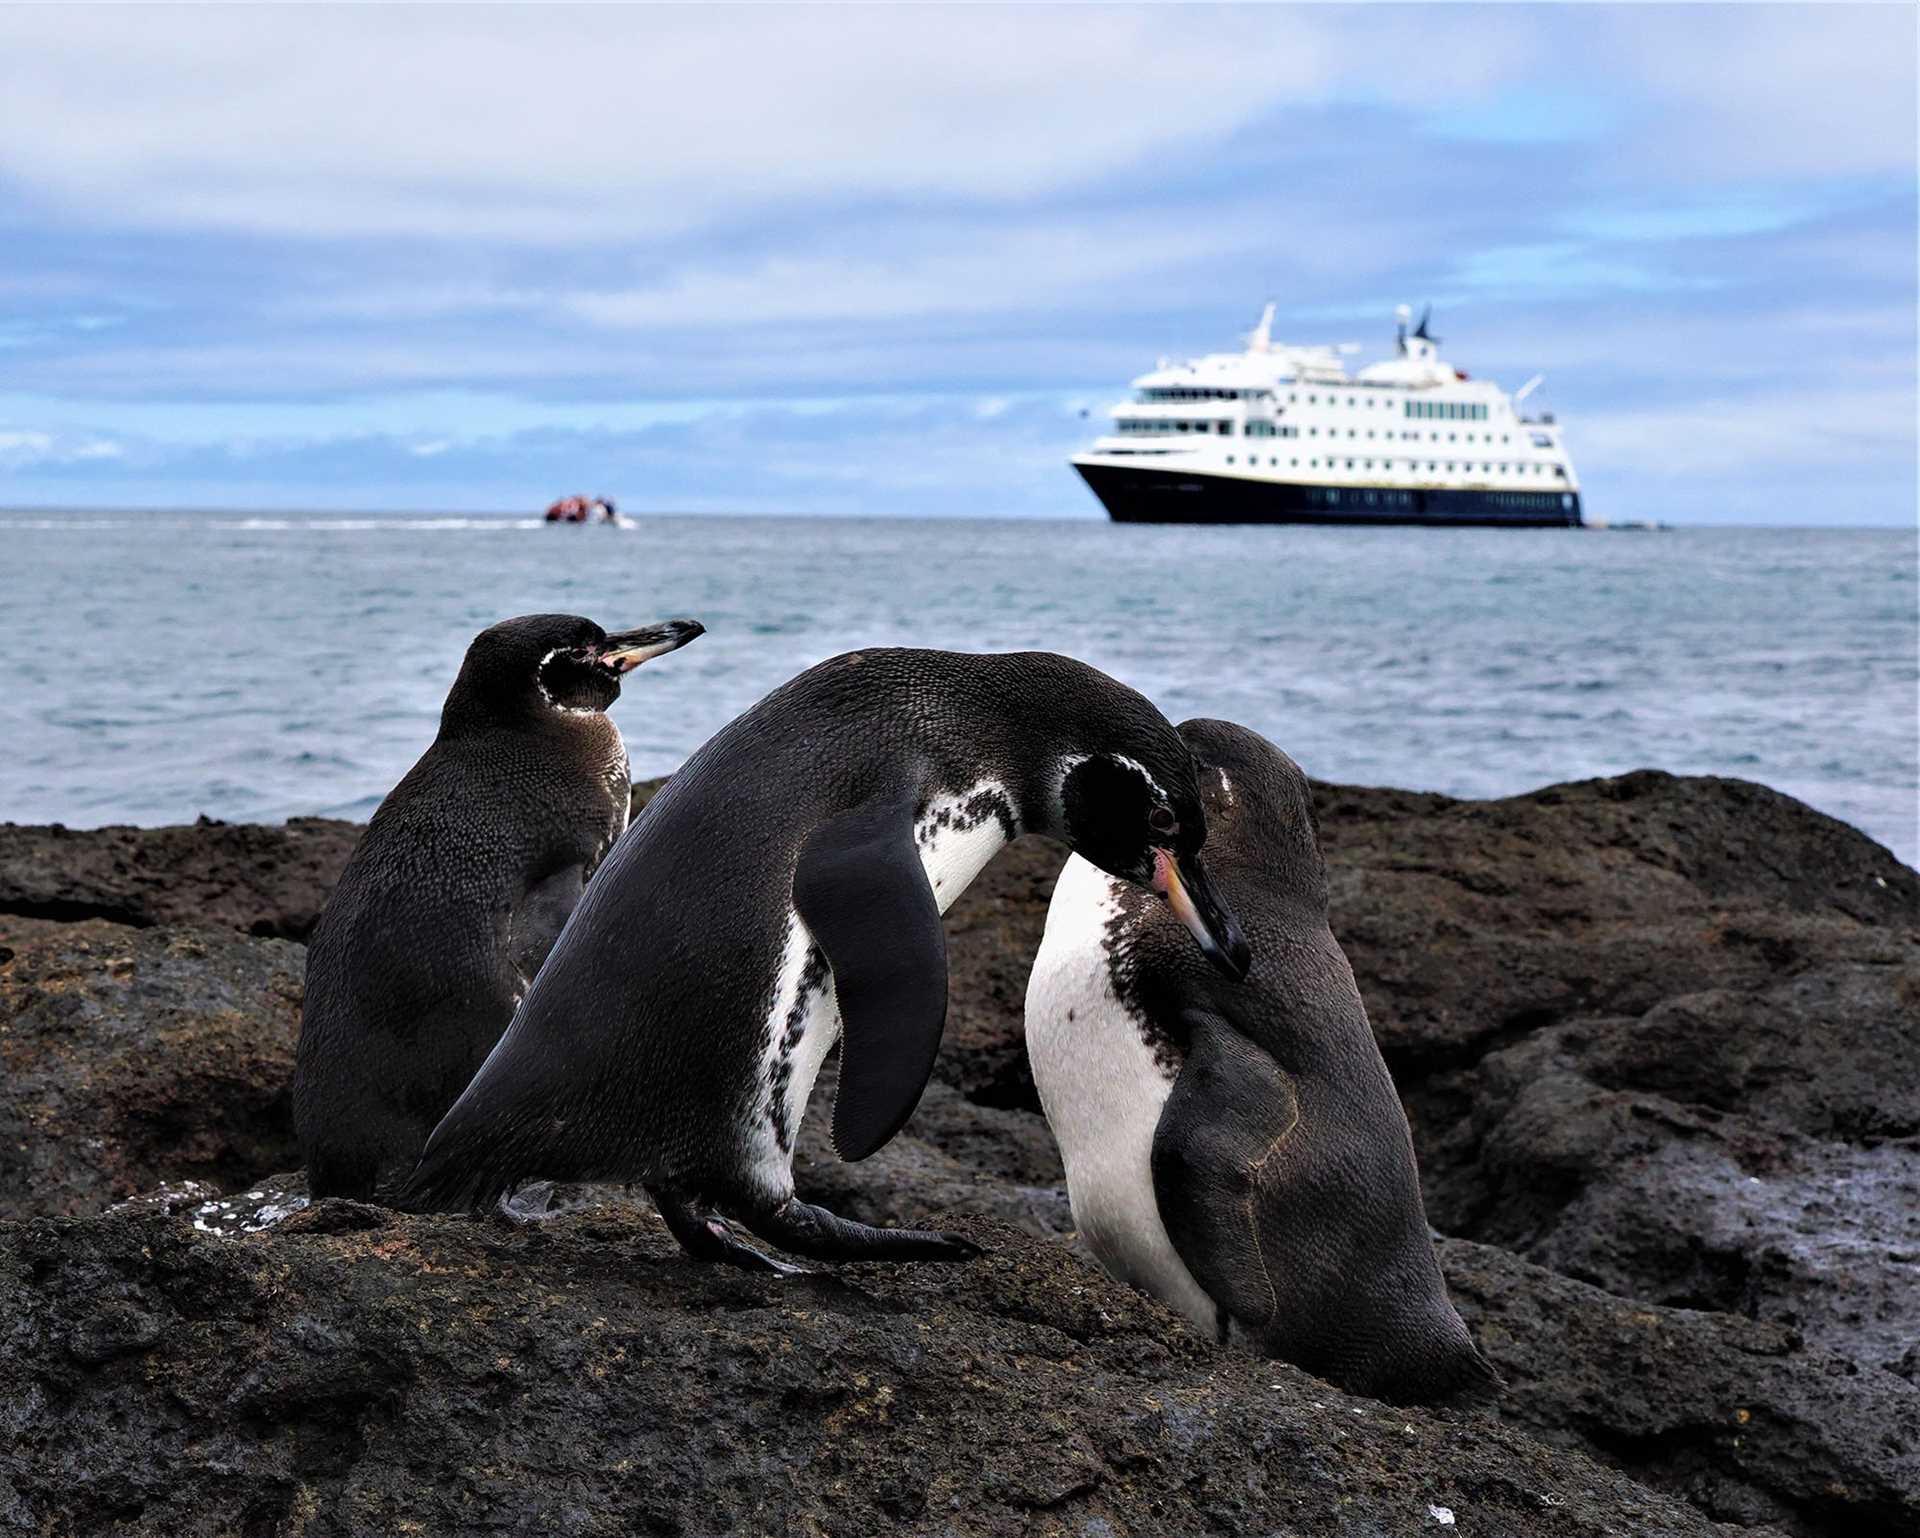 galapagos penguins and national geographic endeavour ii